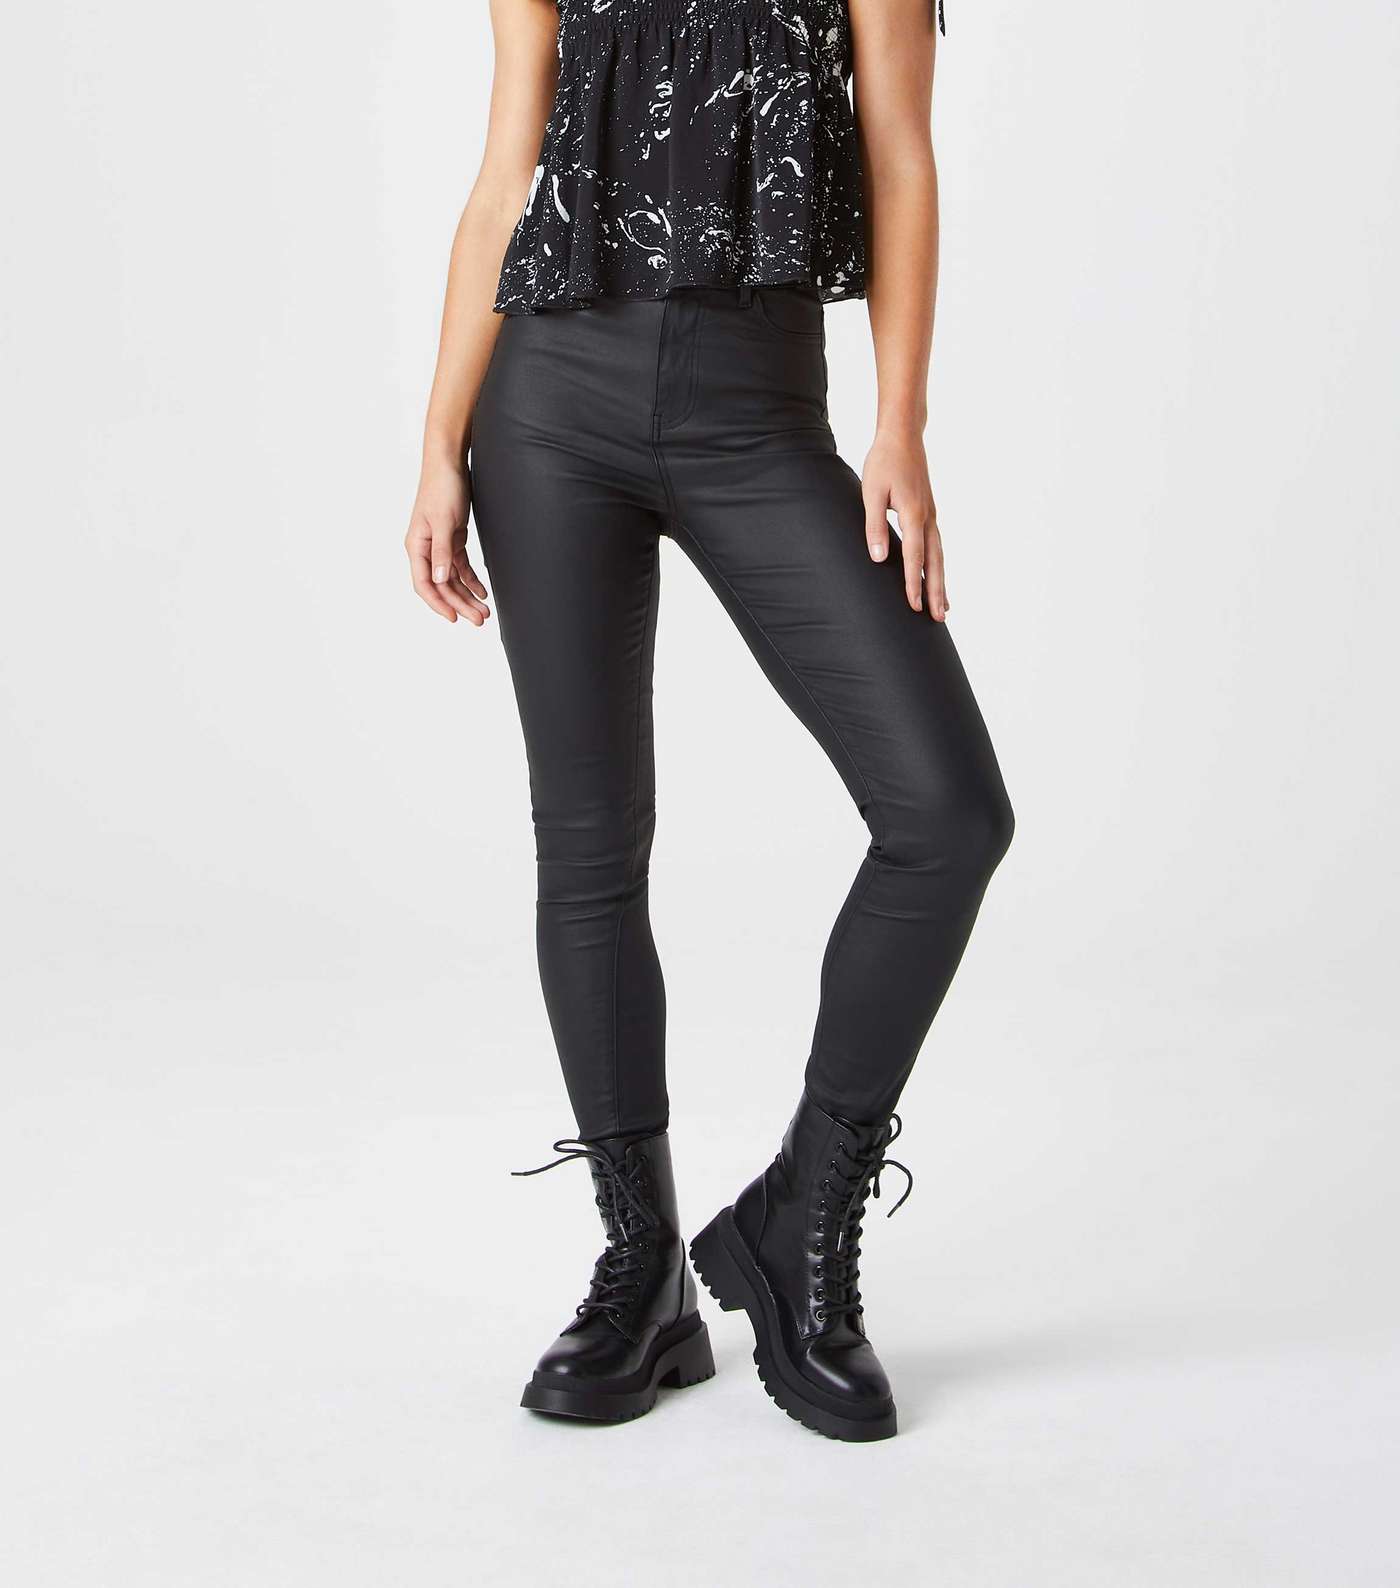 Urban Bliss Black Leather-Look High Waist Skinny Jeans  Image 2